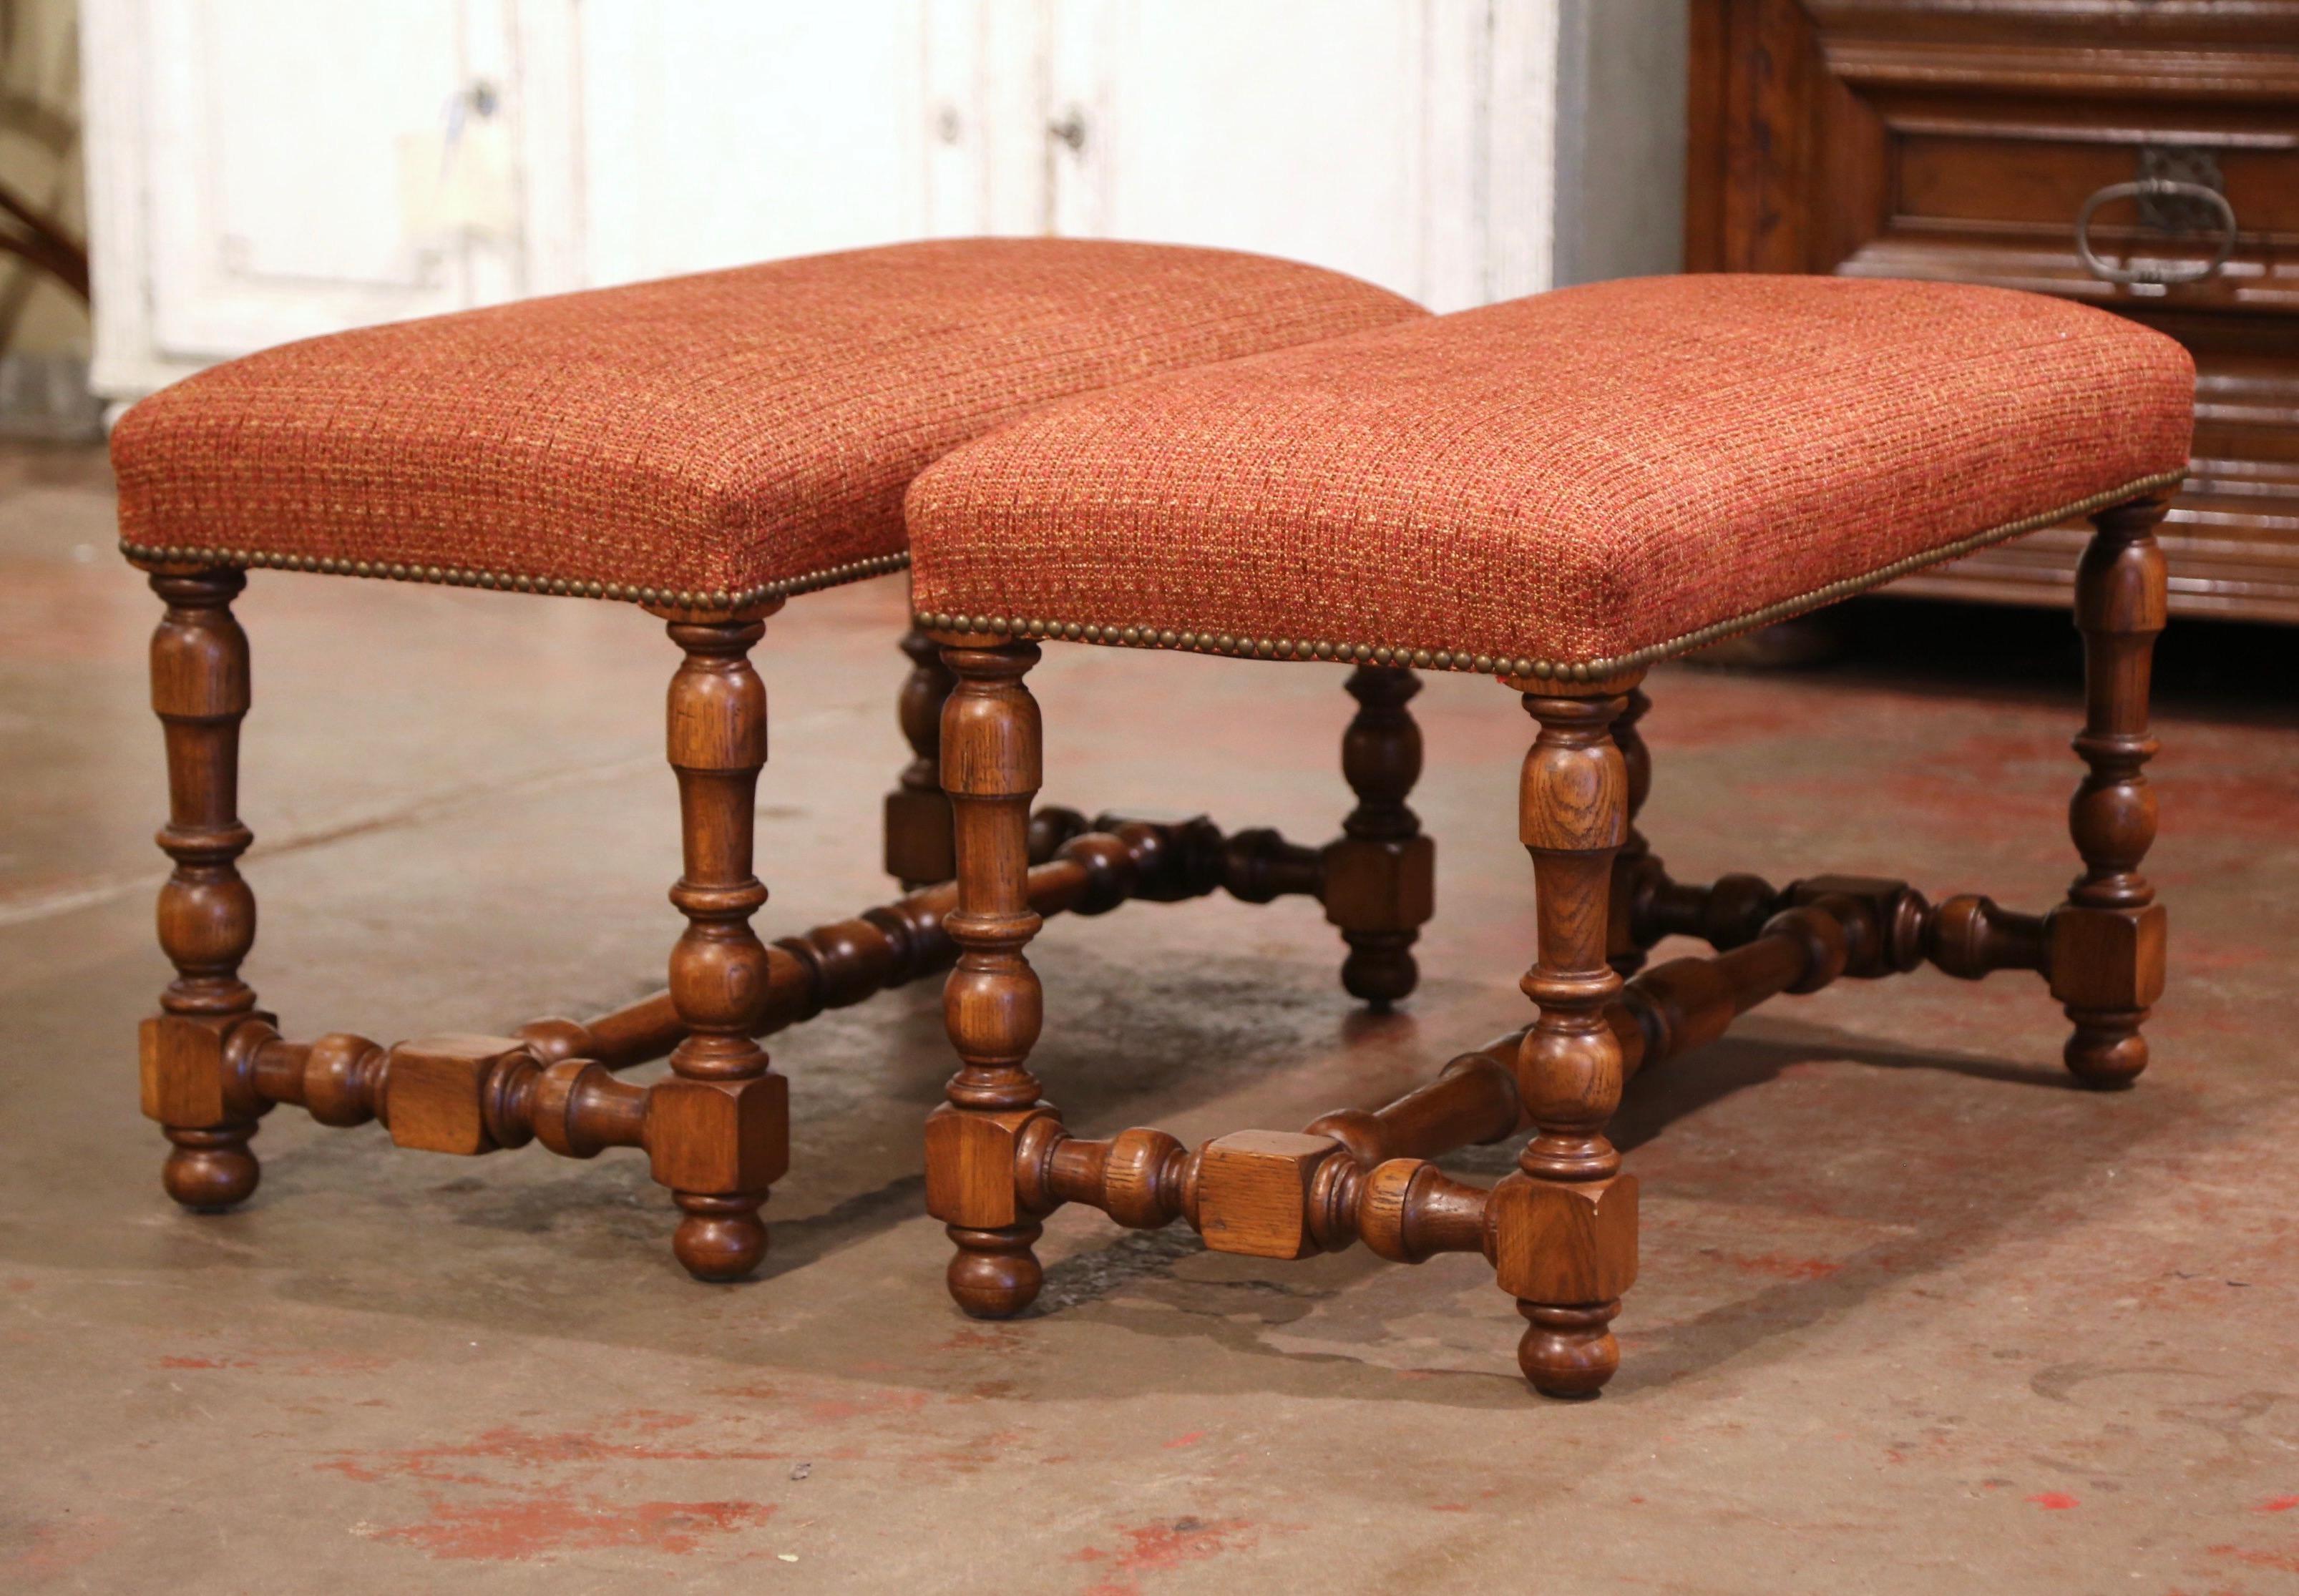 Decorate a hall way or add extra seating to a living room with this elegant pair of vintage benches. Crafted in France circa 1960 and built of solid oak, each seating features four delicately carved, turned legs with a matching stretcher. The top